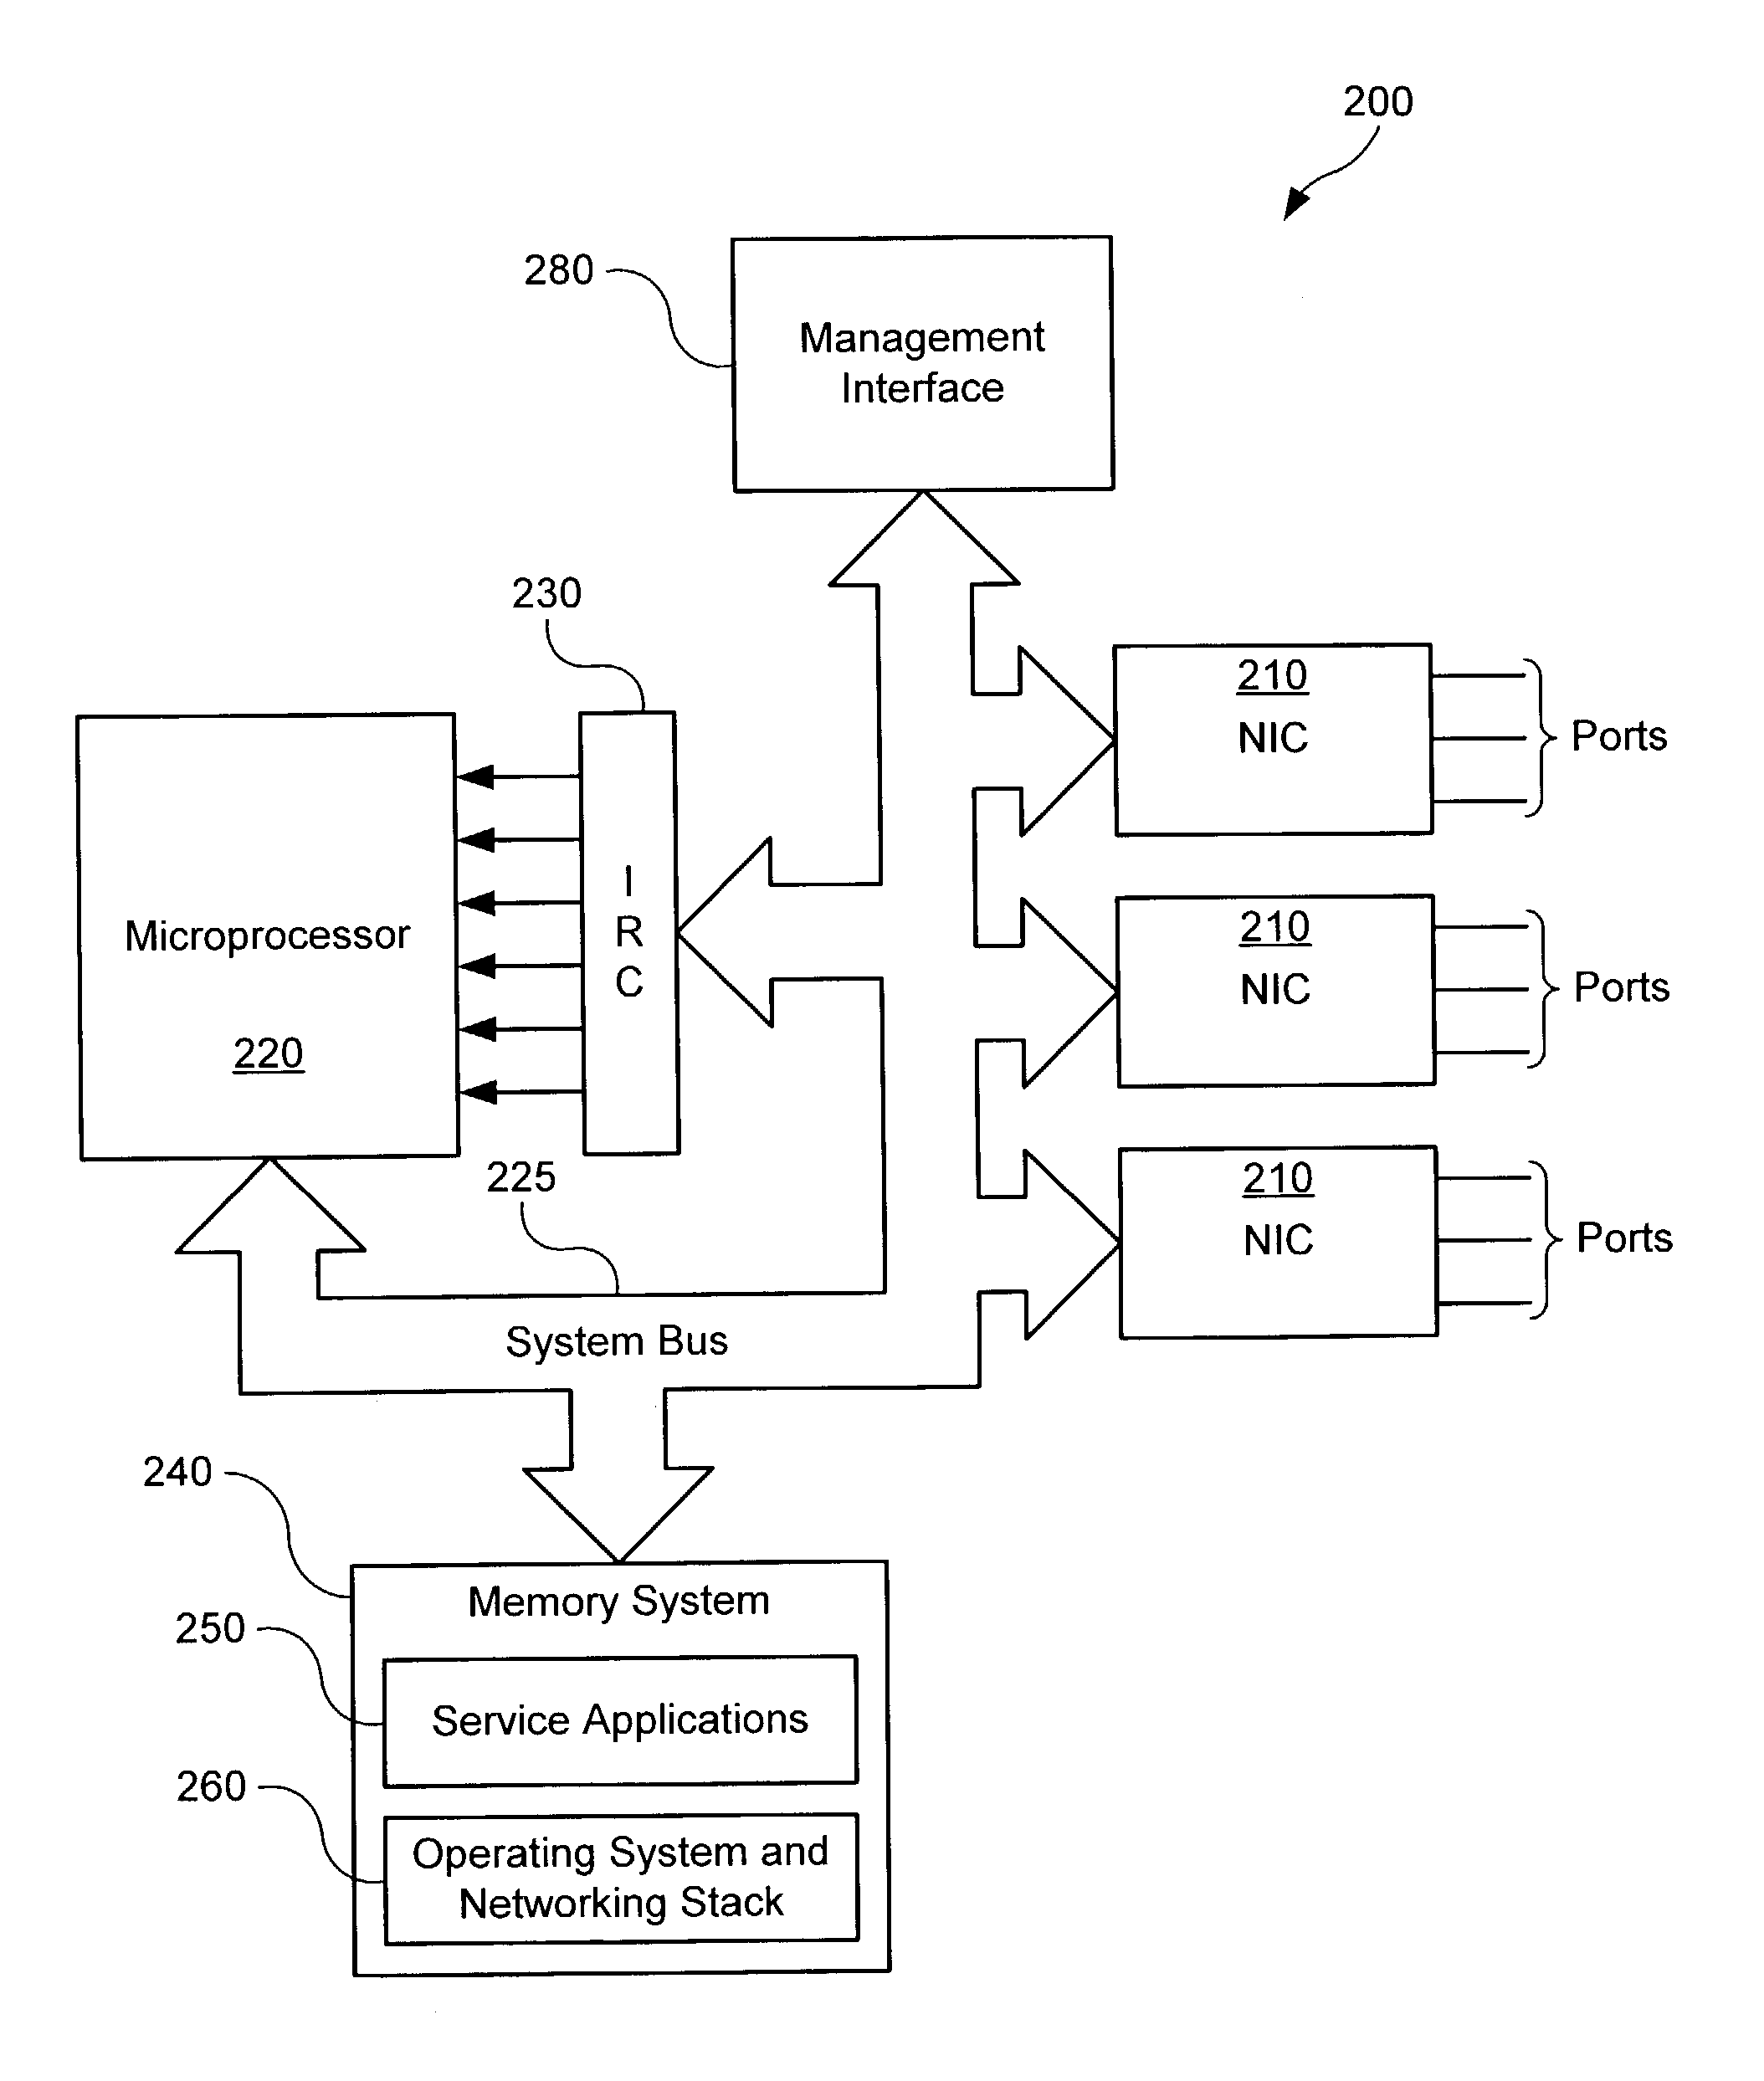 Systems and methods for providing differentiated services within a network communication system